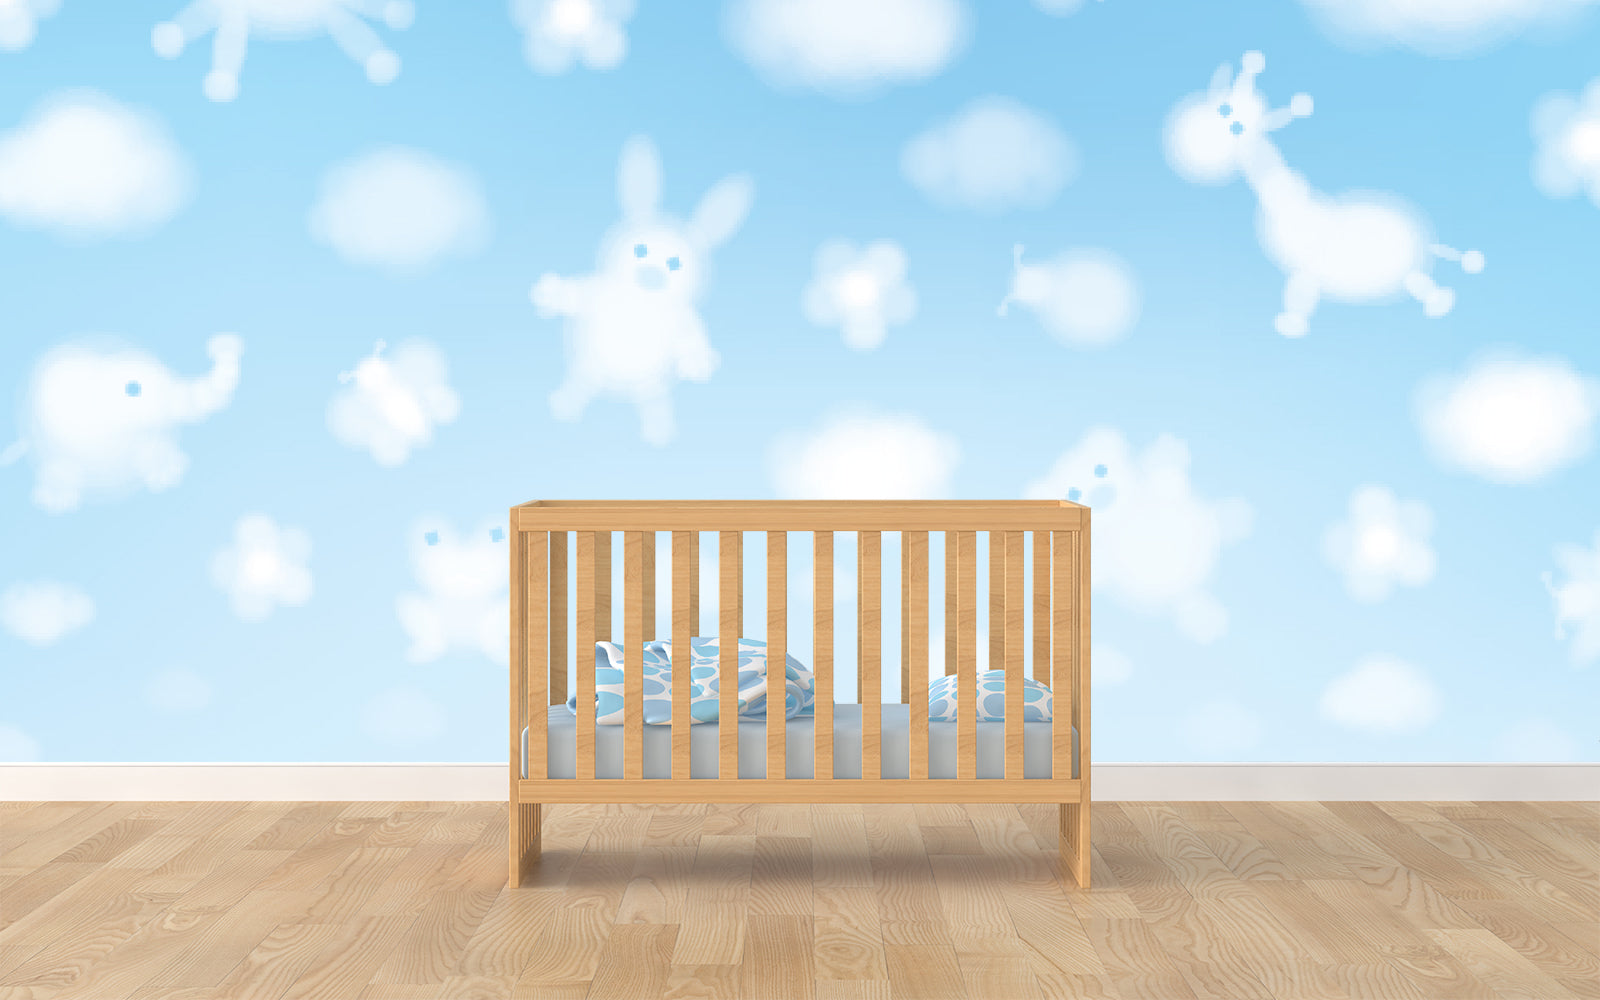 In the mural behind a crib on hardwood floor, animal-shaped clouds float through a pale blue sky.